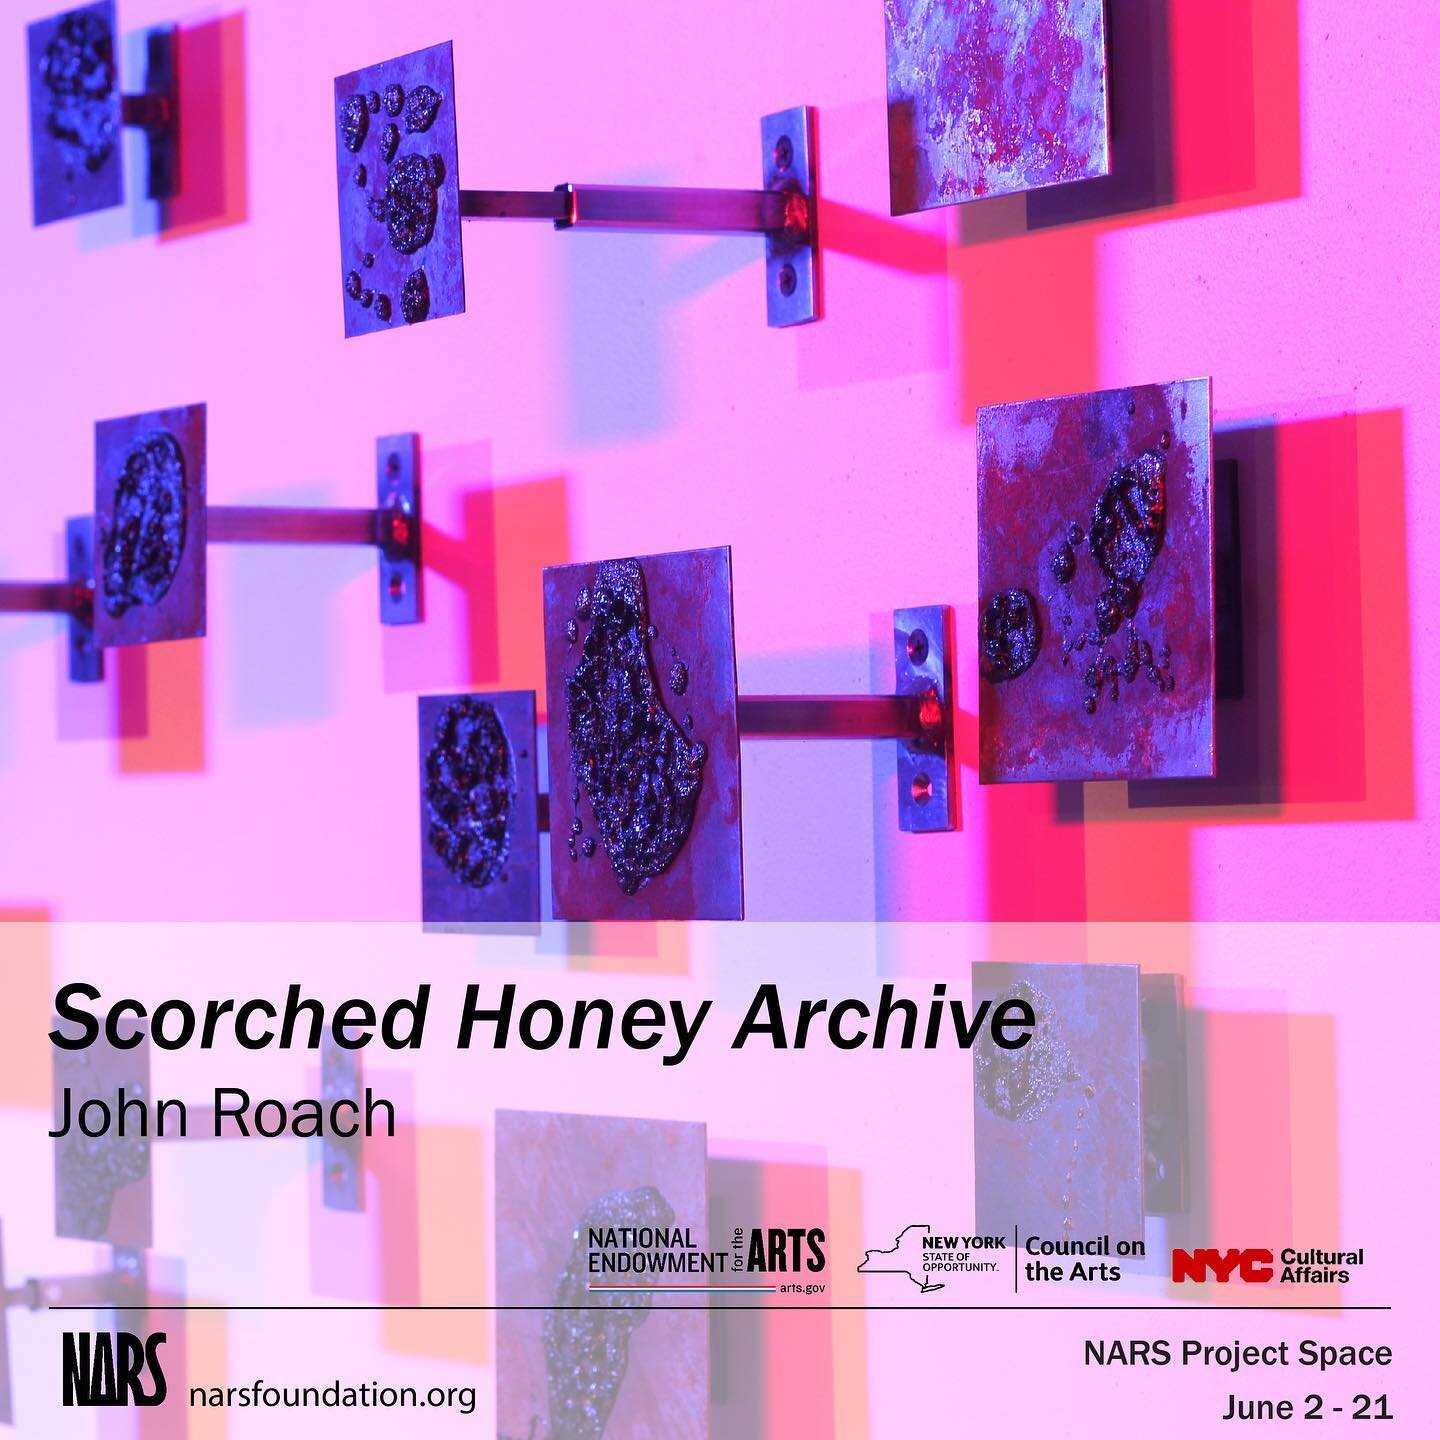 NARS Foundation is pleased to announce 'Scorched Honey Archive', a solo exhibition by NARS Residency Alumni John Roach (@johnroachart)

&lsquo;Scorched Honey Archive&rsquo; is a multisensory meditation on human disruption of pollinator ecology. It pa